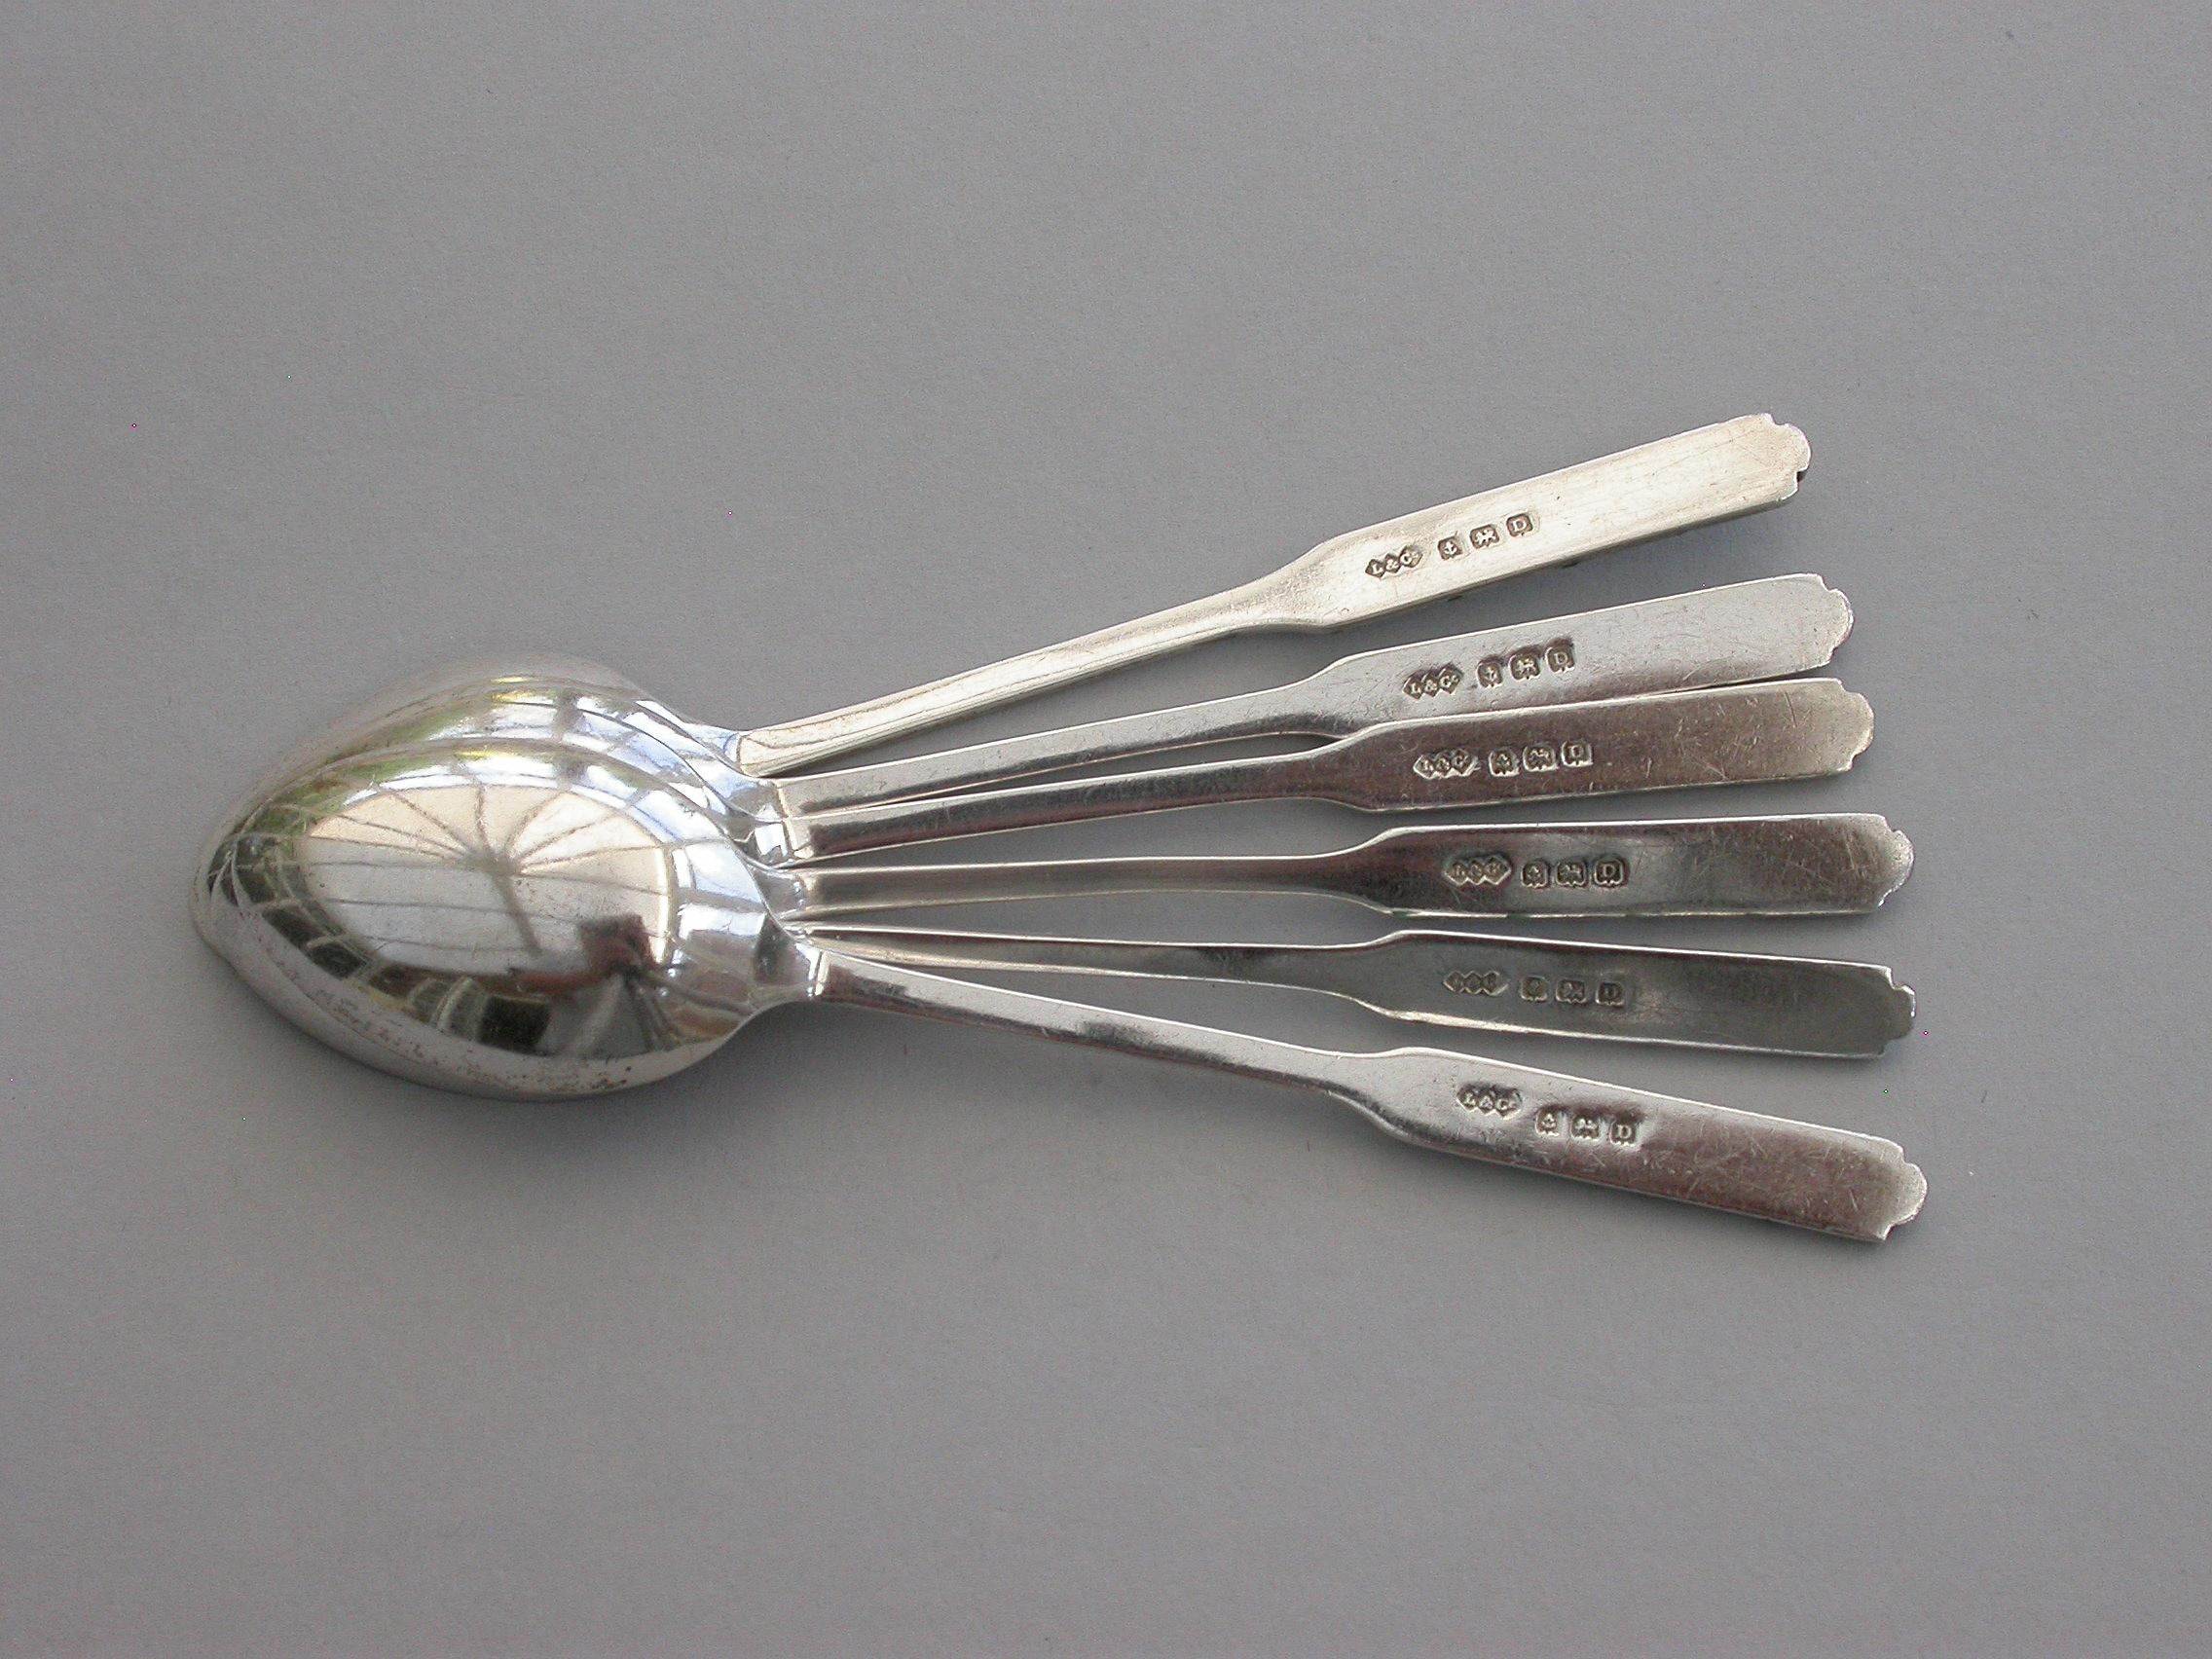 Cased Set 12 Silver and Enamel Pastry Spoons & Forks by Liberty & Co, 1927-1928 For Sale 1